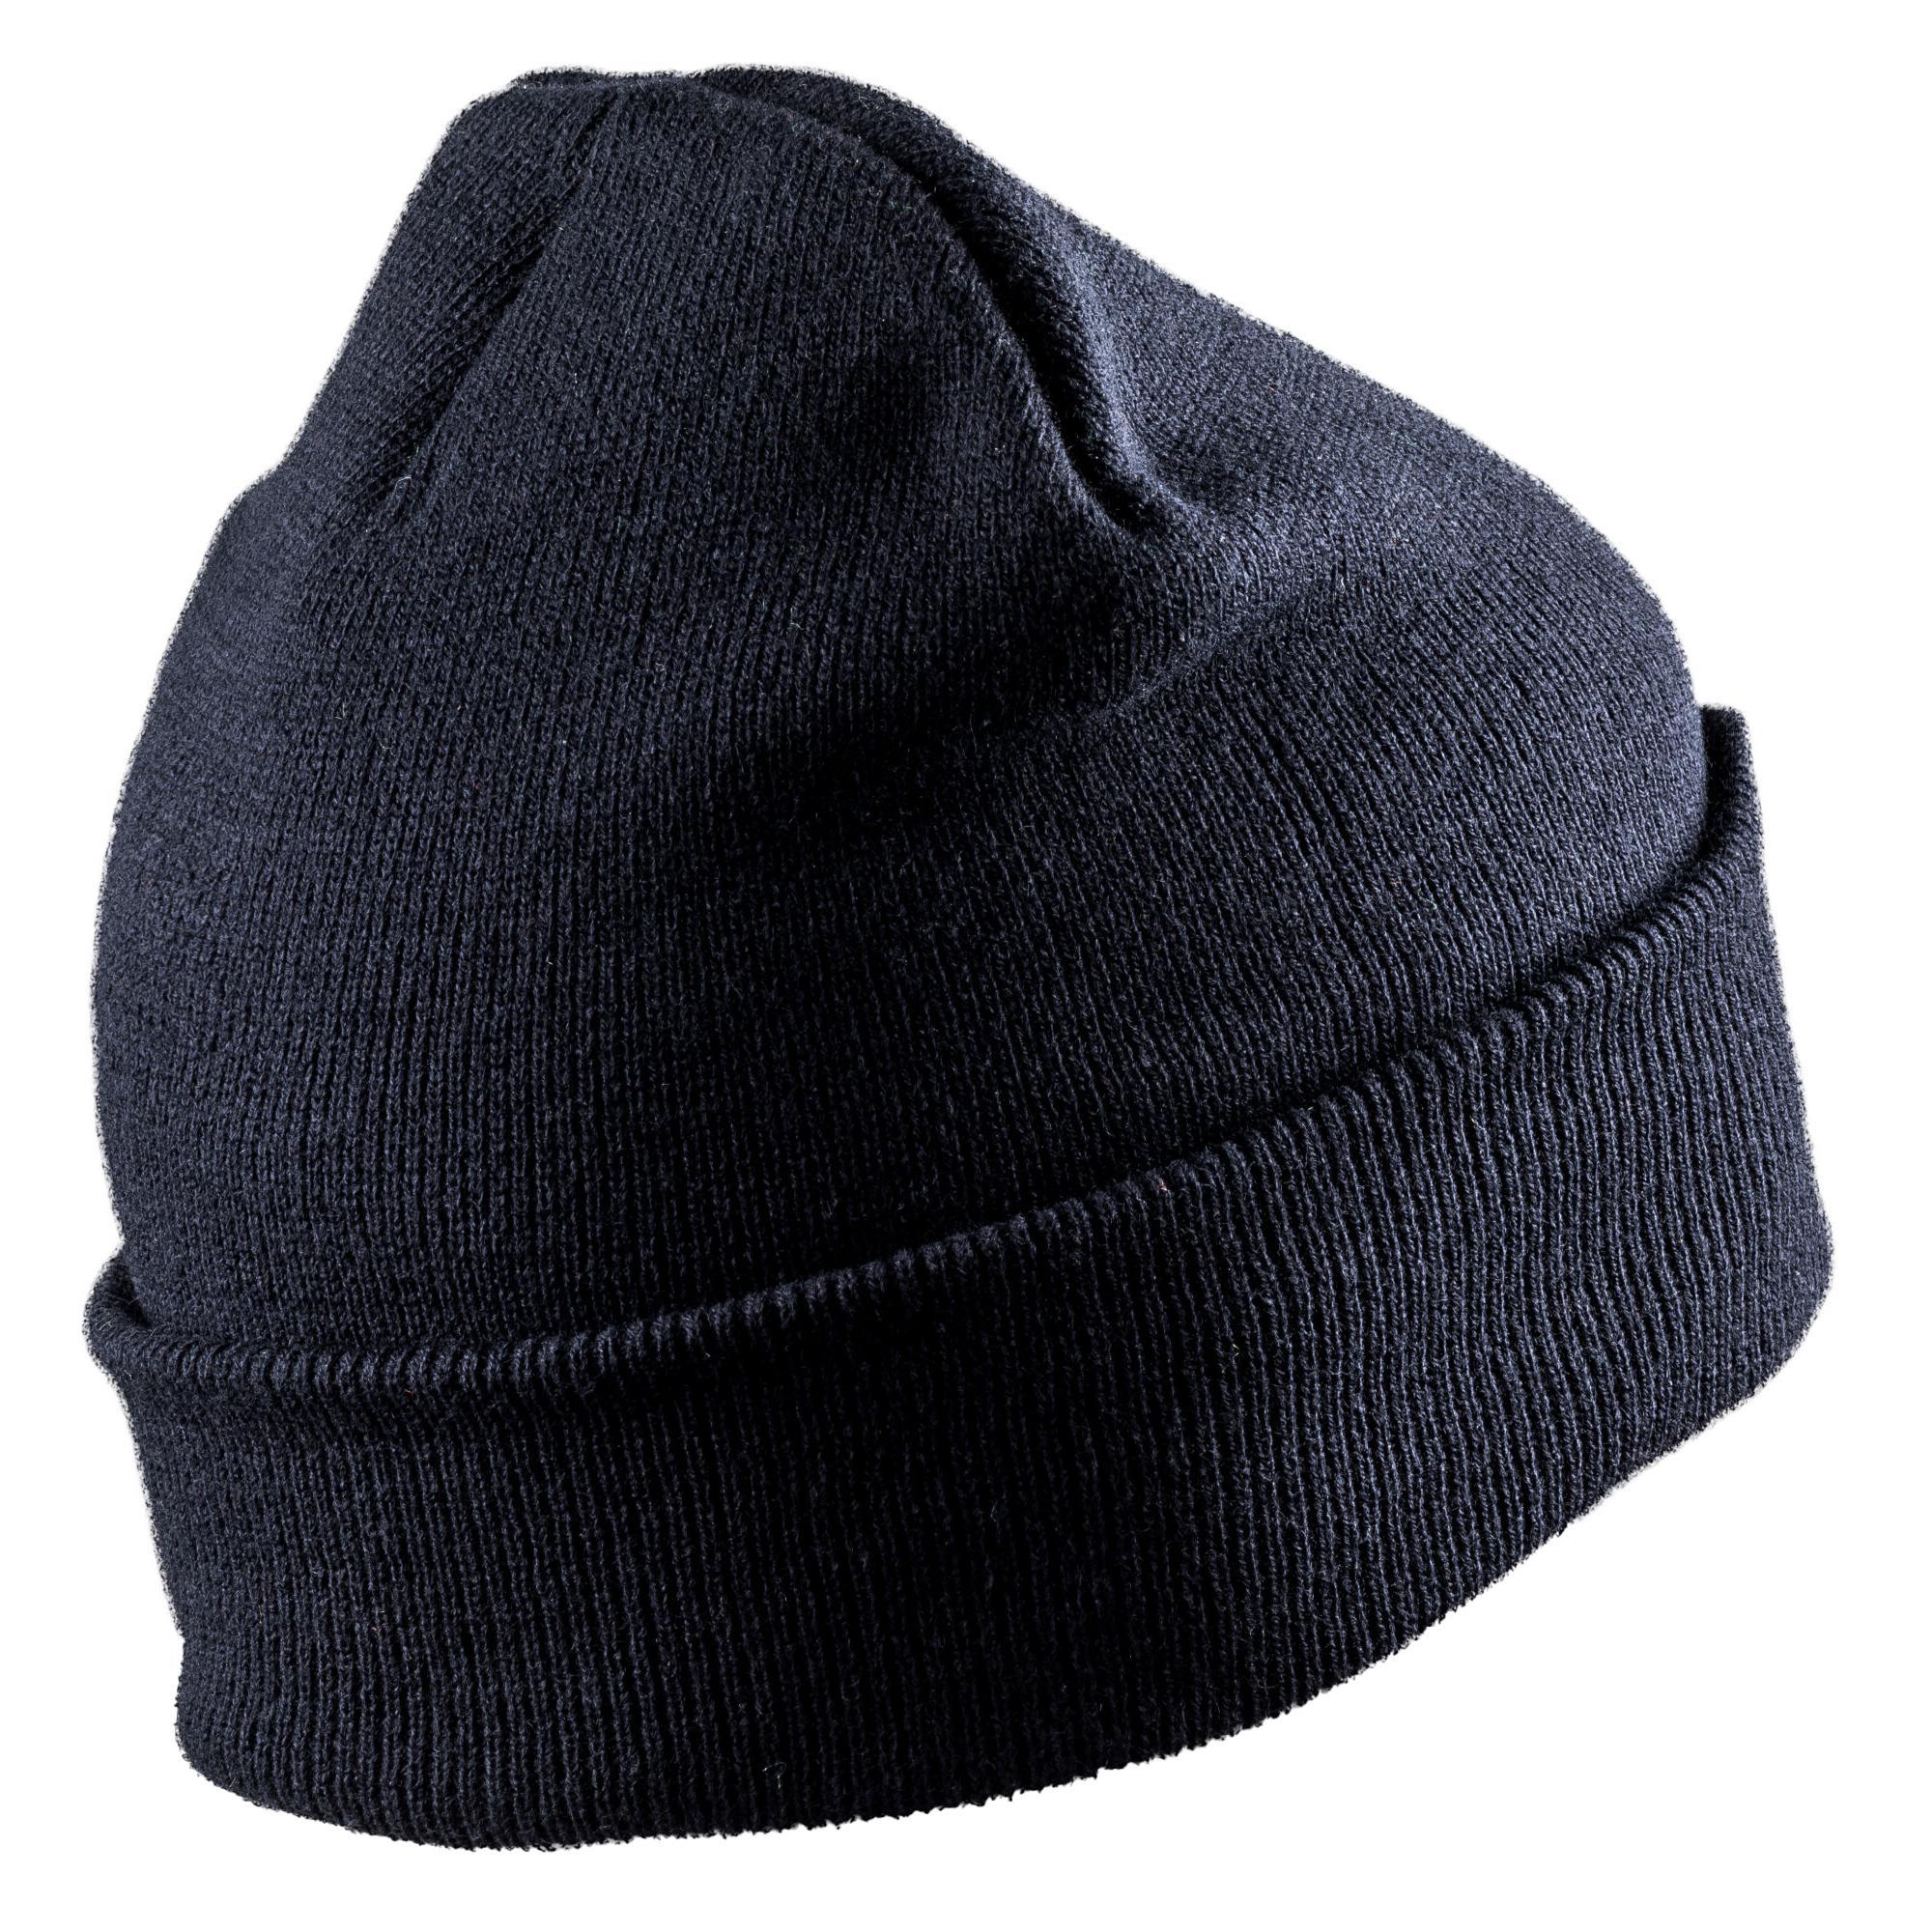 Result Unisex Adult Thinsulate Printable Winter Beanie (Navy Blue) (One Size)